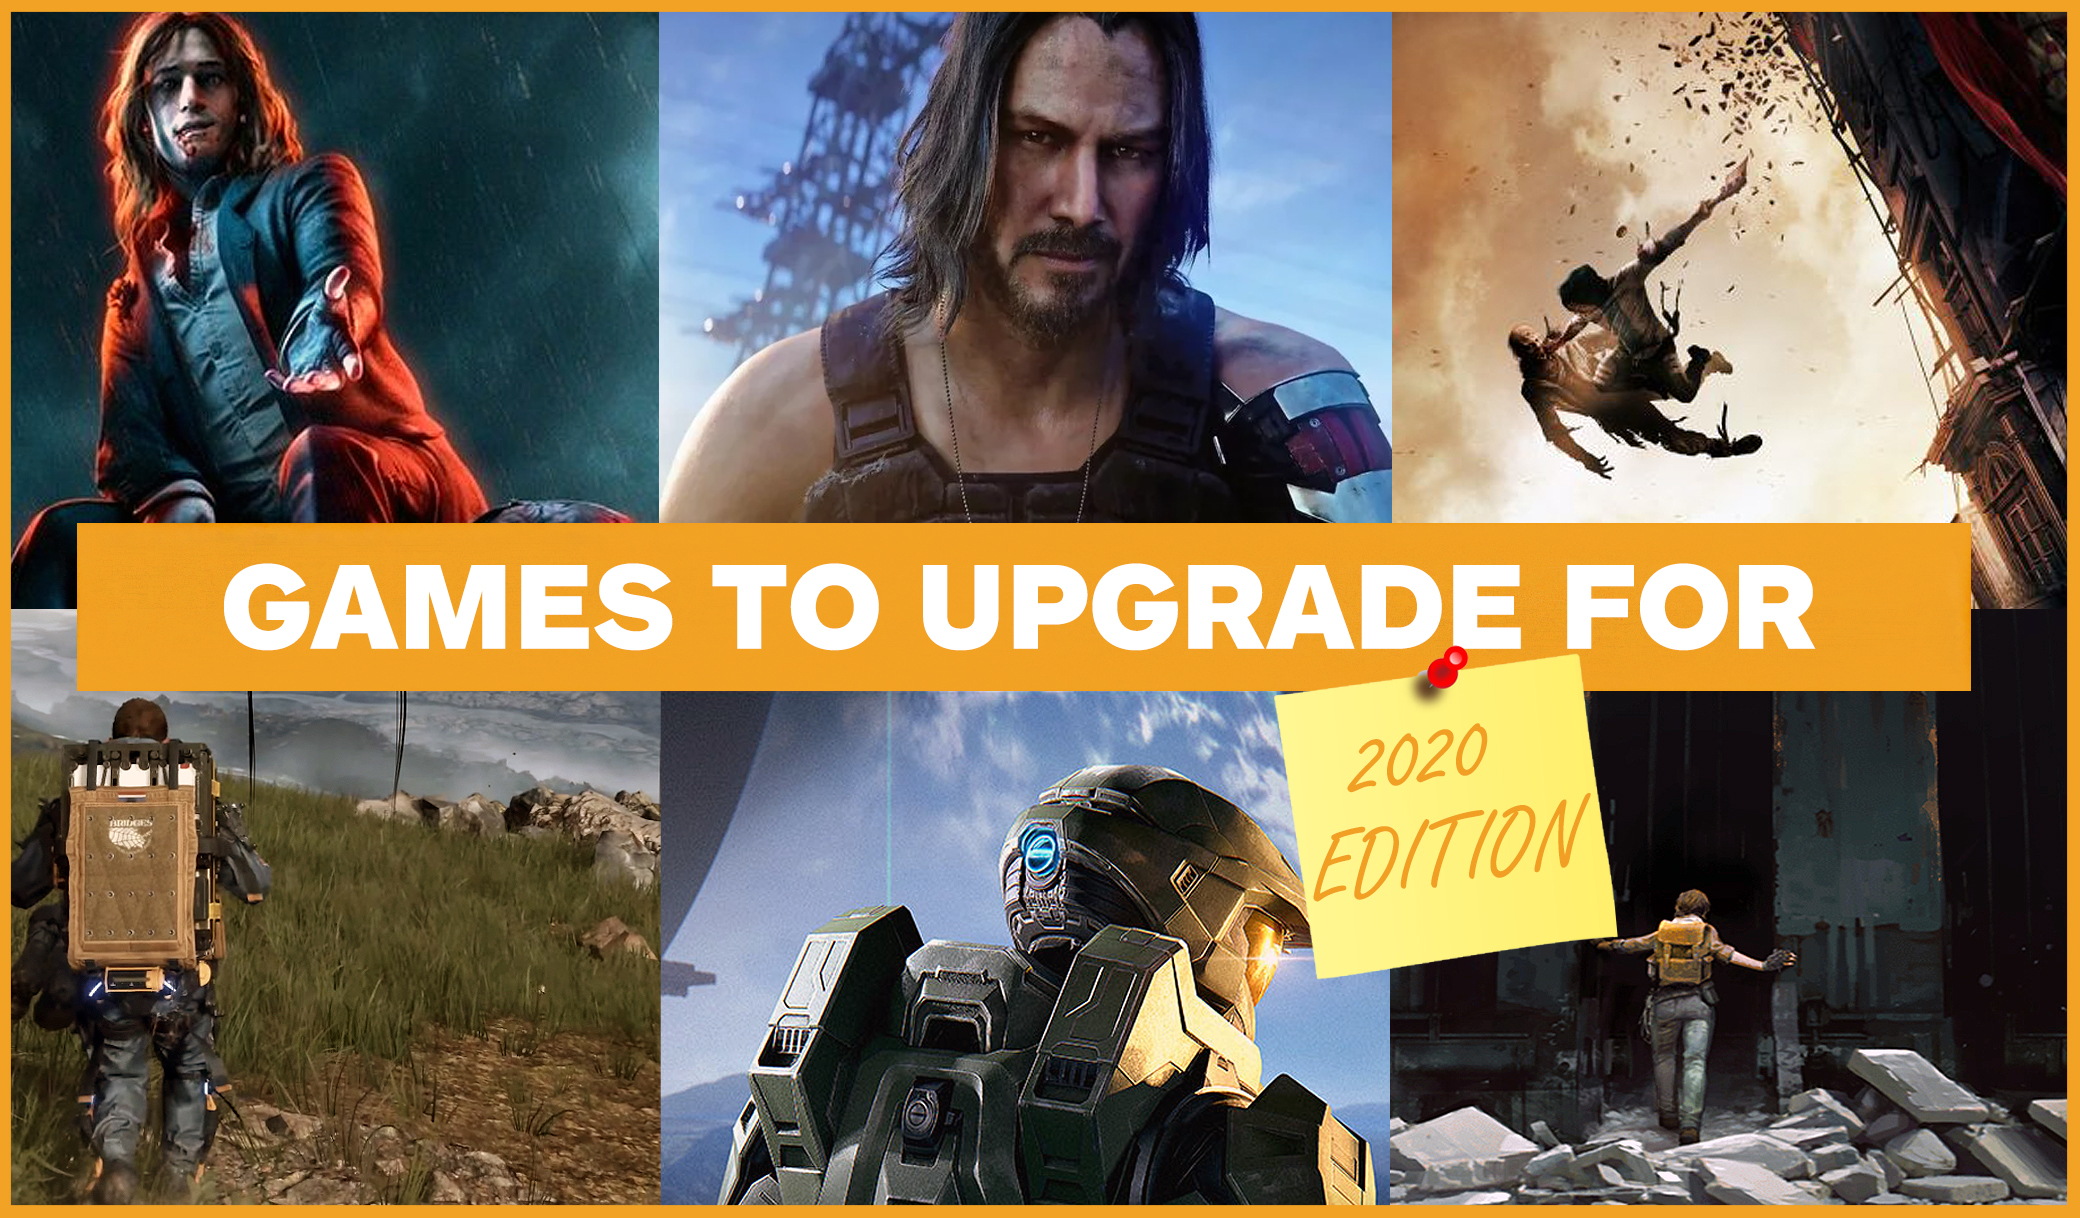 Games to Upgrade For 2020